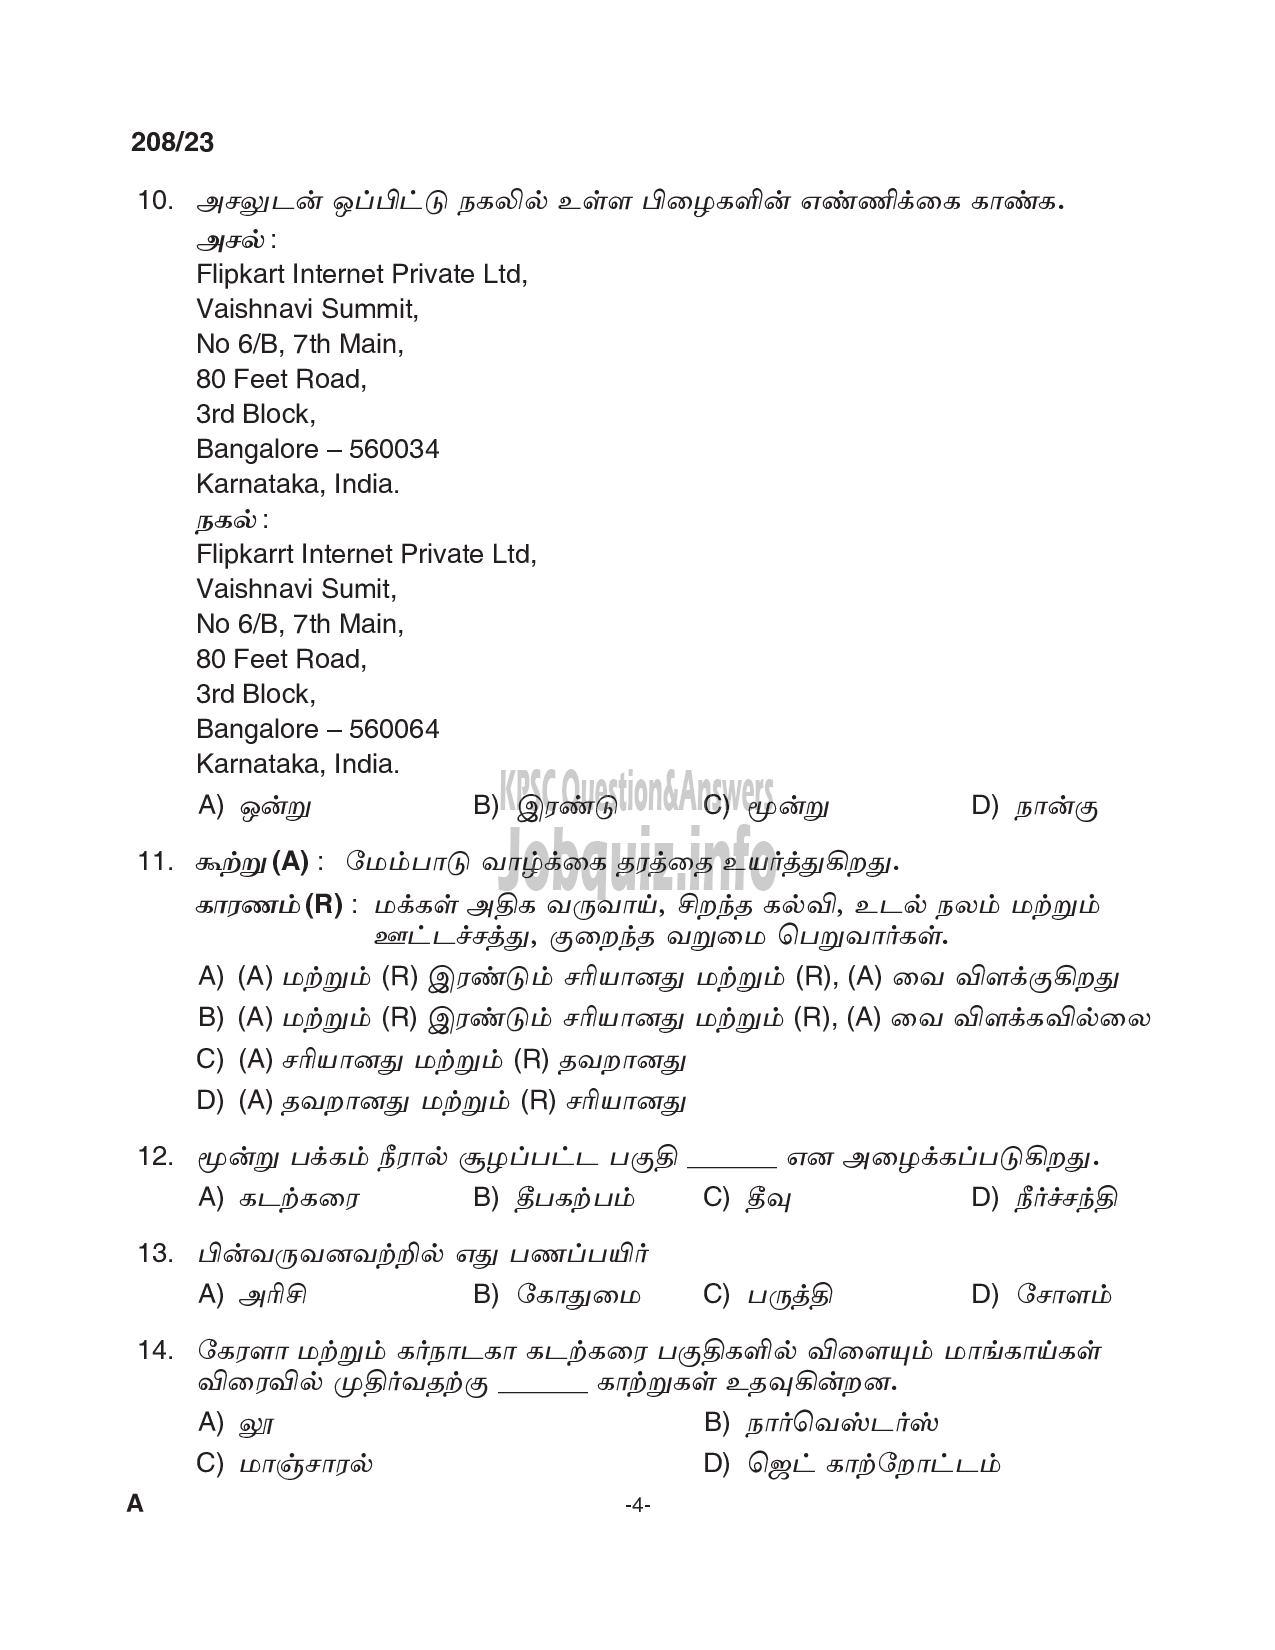 Kerala PSC Question Paper - Clerk/ LD Clerk (Tamil and Malayalam knowing) (Preliminary Examination)-4